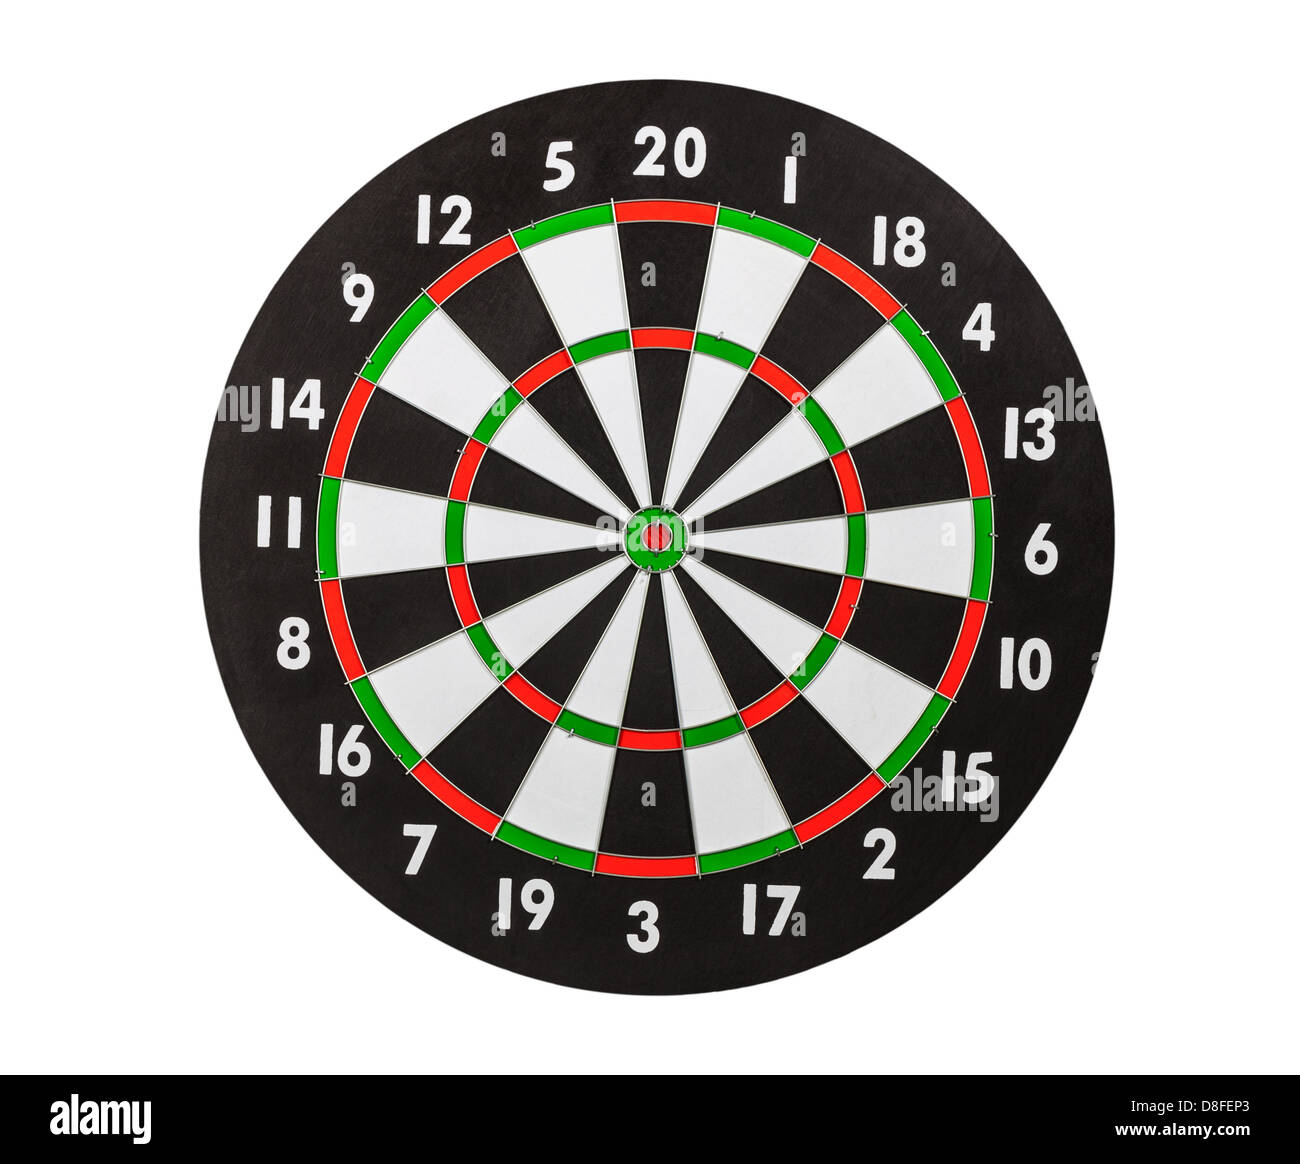 Dart board isolated on white. Stock Photo